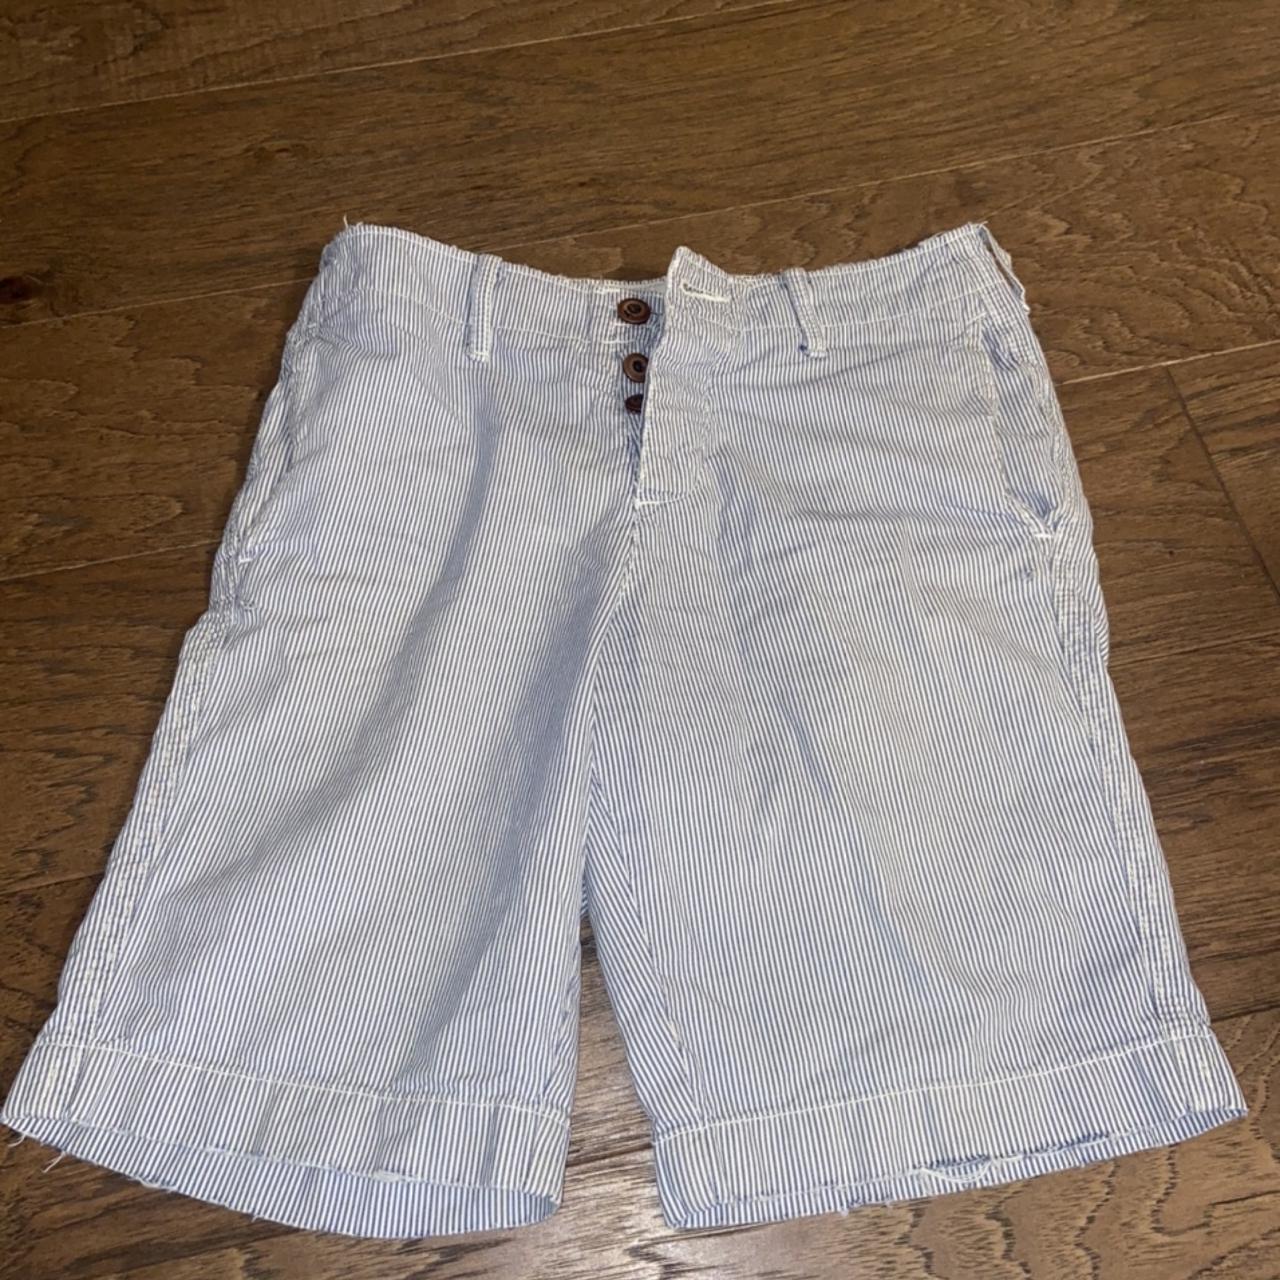 Men’s Hollister blue and white stripped shorts good... - Depop